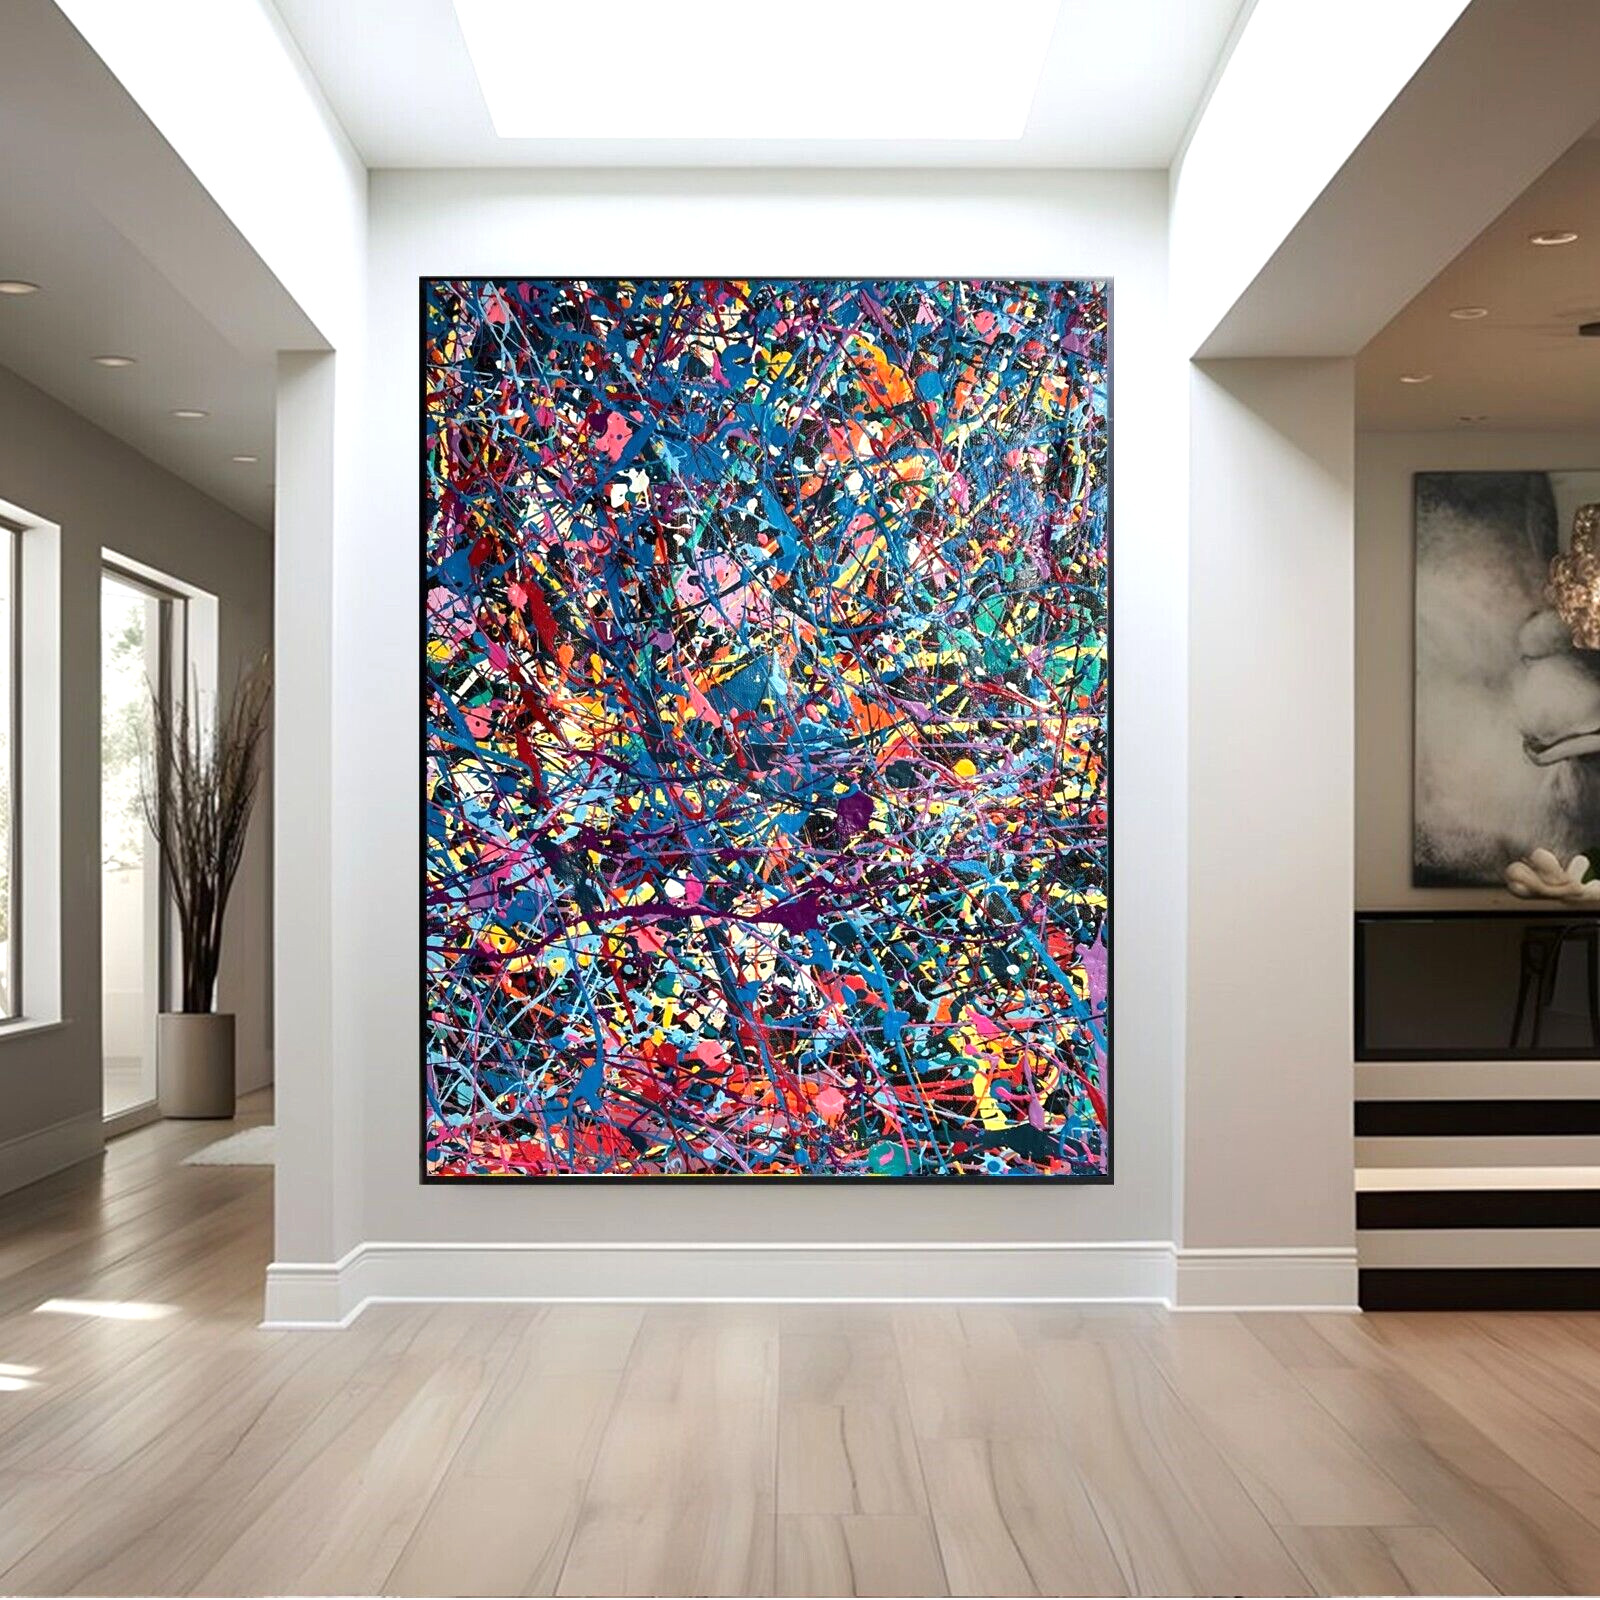 Sale Abstract Red Blue Orange 36H X 24W Framed Canvas Giclee $595 Now $295